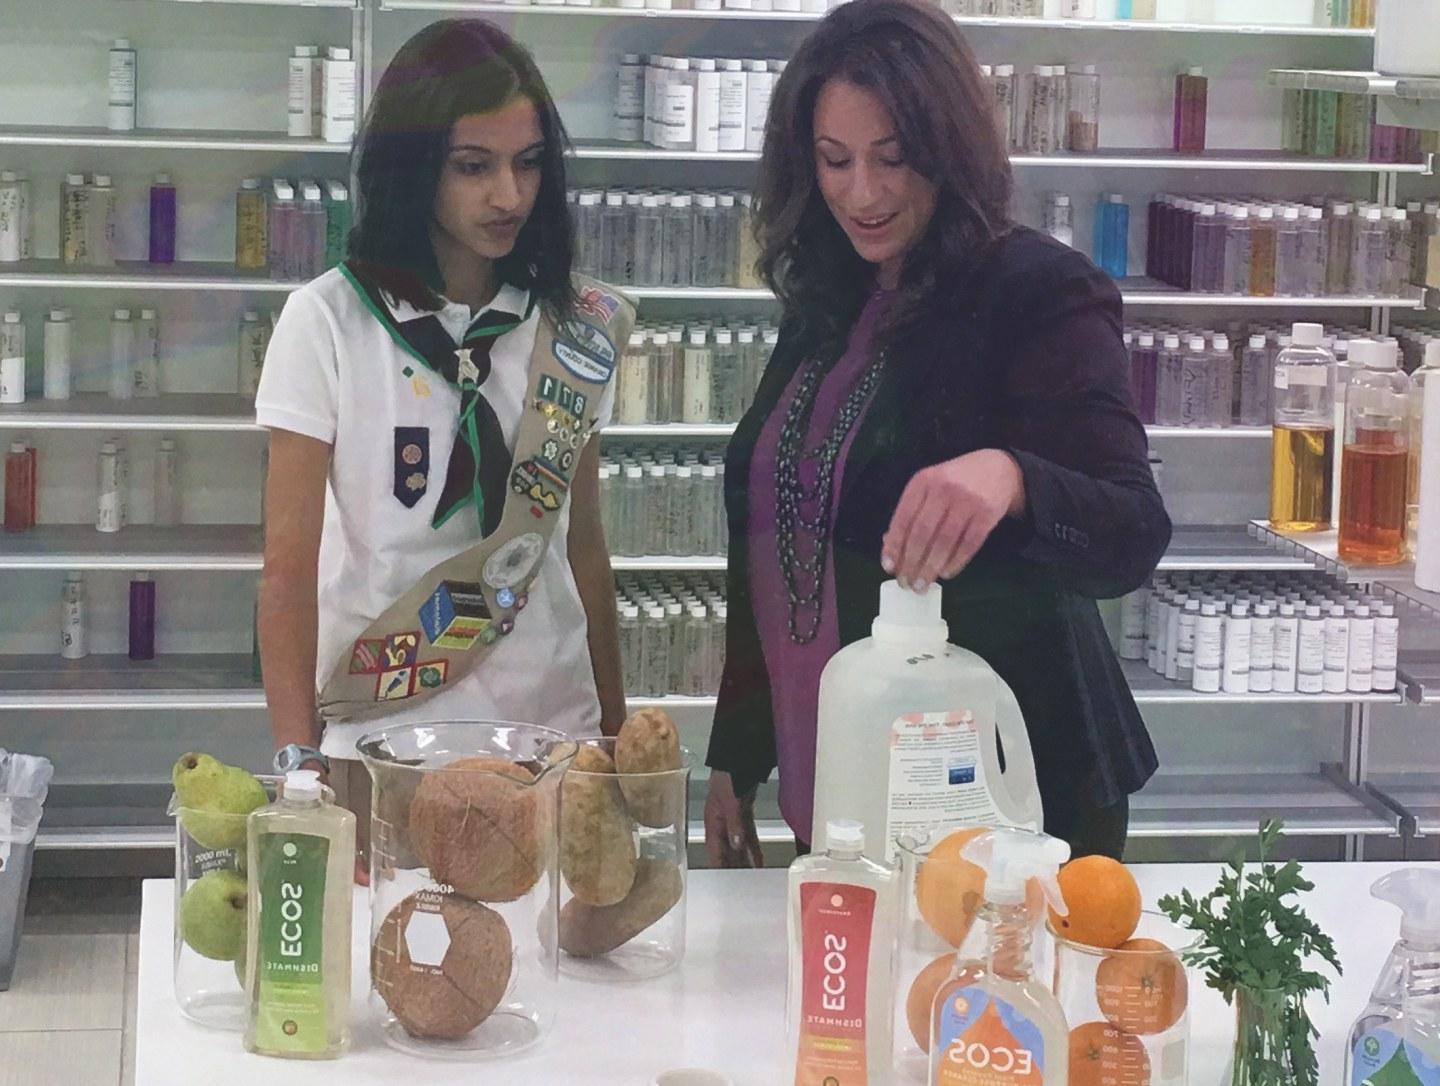 Woman Speaking To Girl About Earth Friendly Products